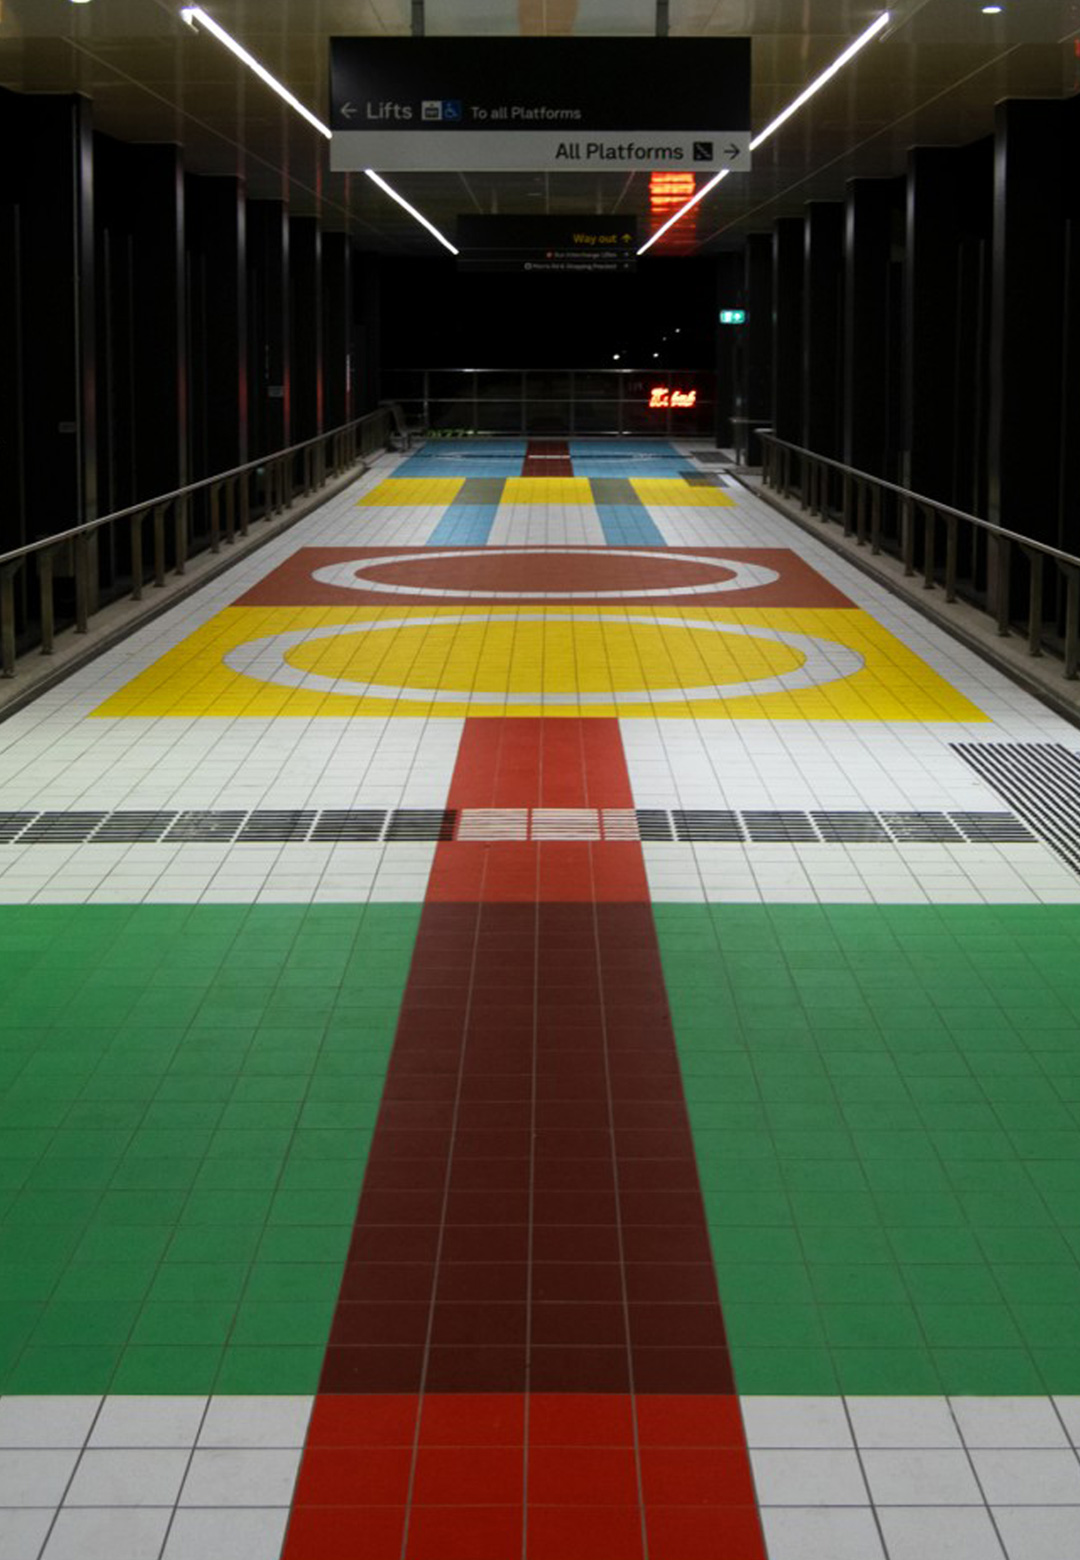 Colourful tiles inspired by 20th-century train tickets envelop Hoppers Crossing walkway